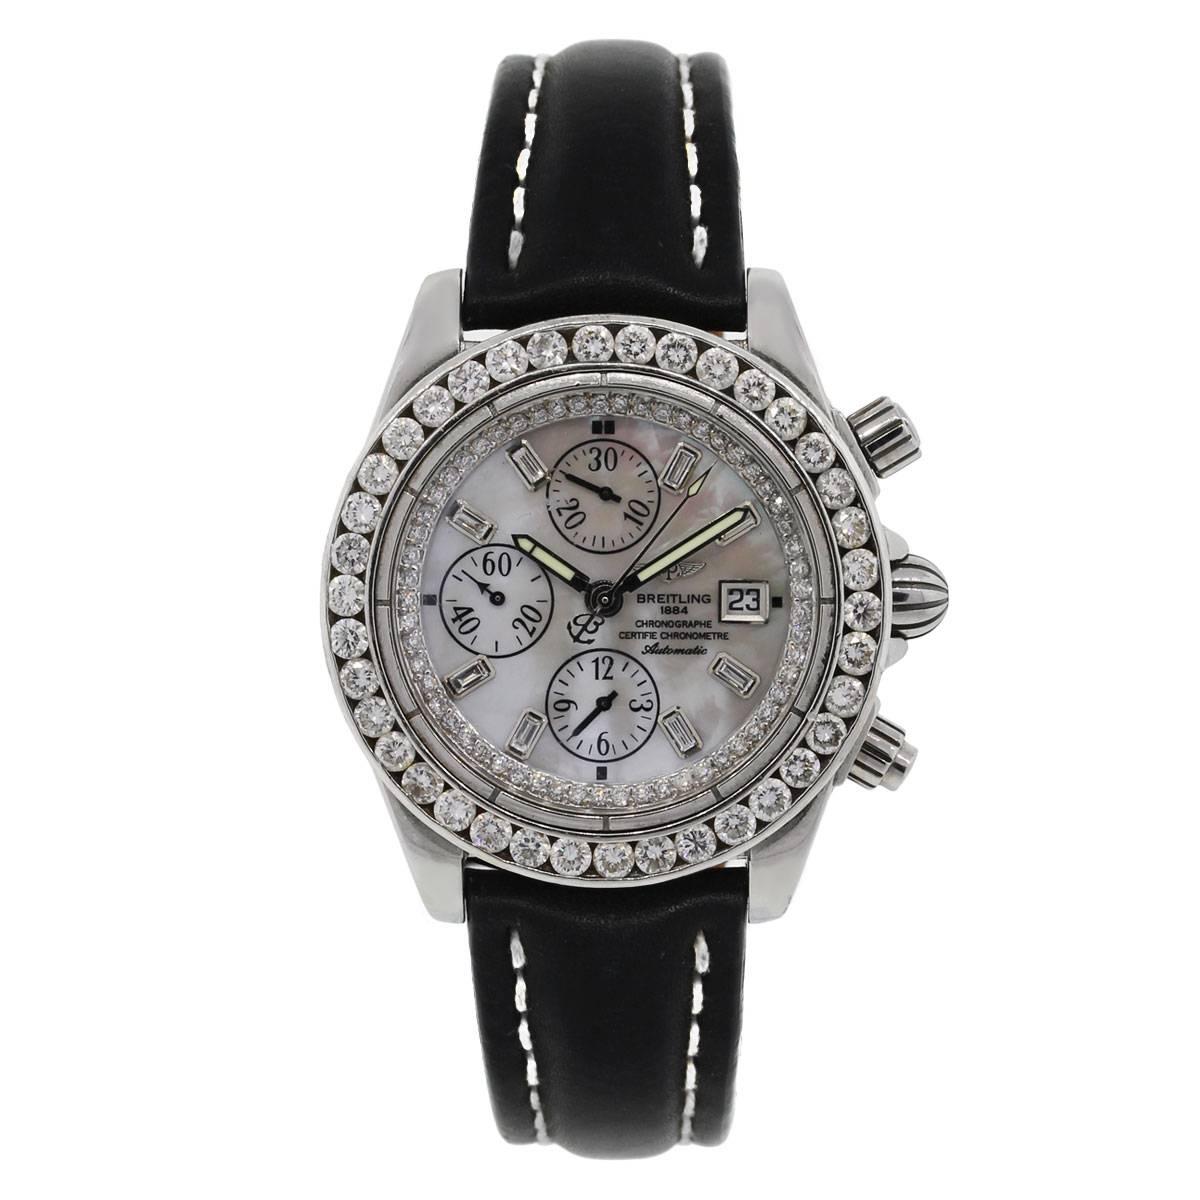 Brand: Breitling
MPN: A13356
Model: Windrider Chronomat Evolution
Case Material: Stainless steel
Crystal: Sapphire
Case Diameter: 43mm
Bezel: Diamond bezel (aftermarket)
Dial: Mother of pearl chronograph diamond dial with luminescent hands, Baguette